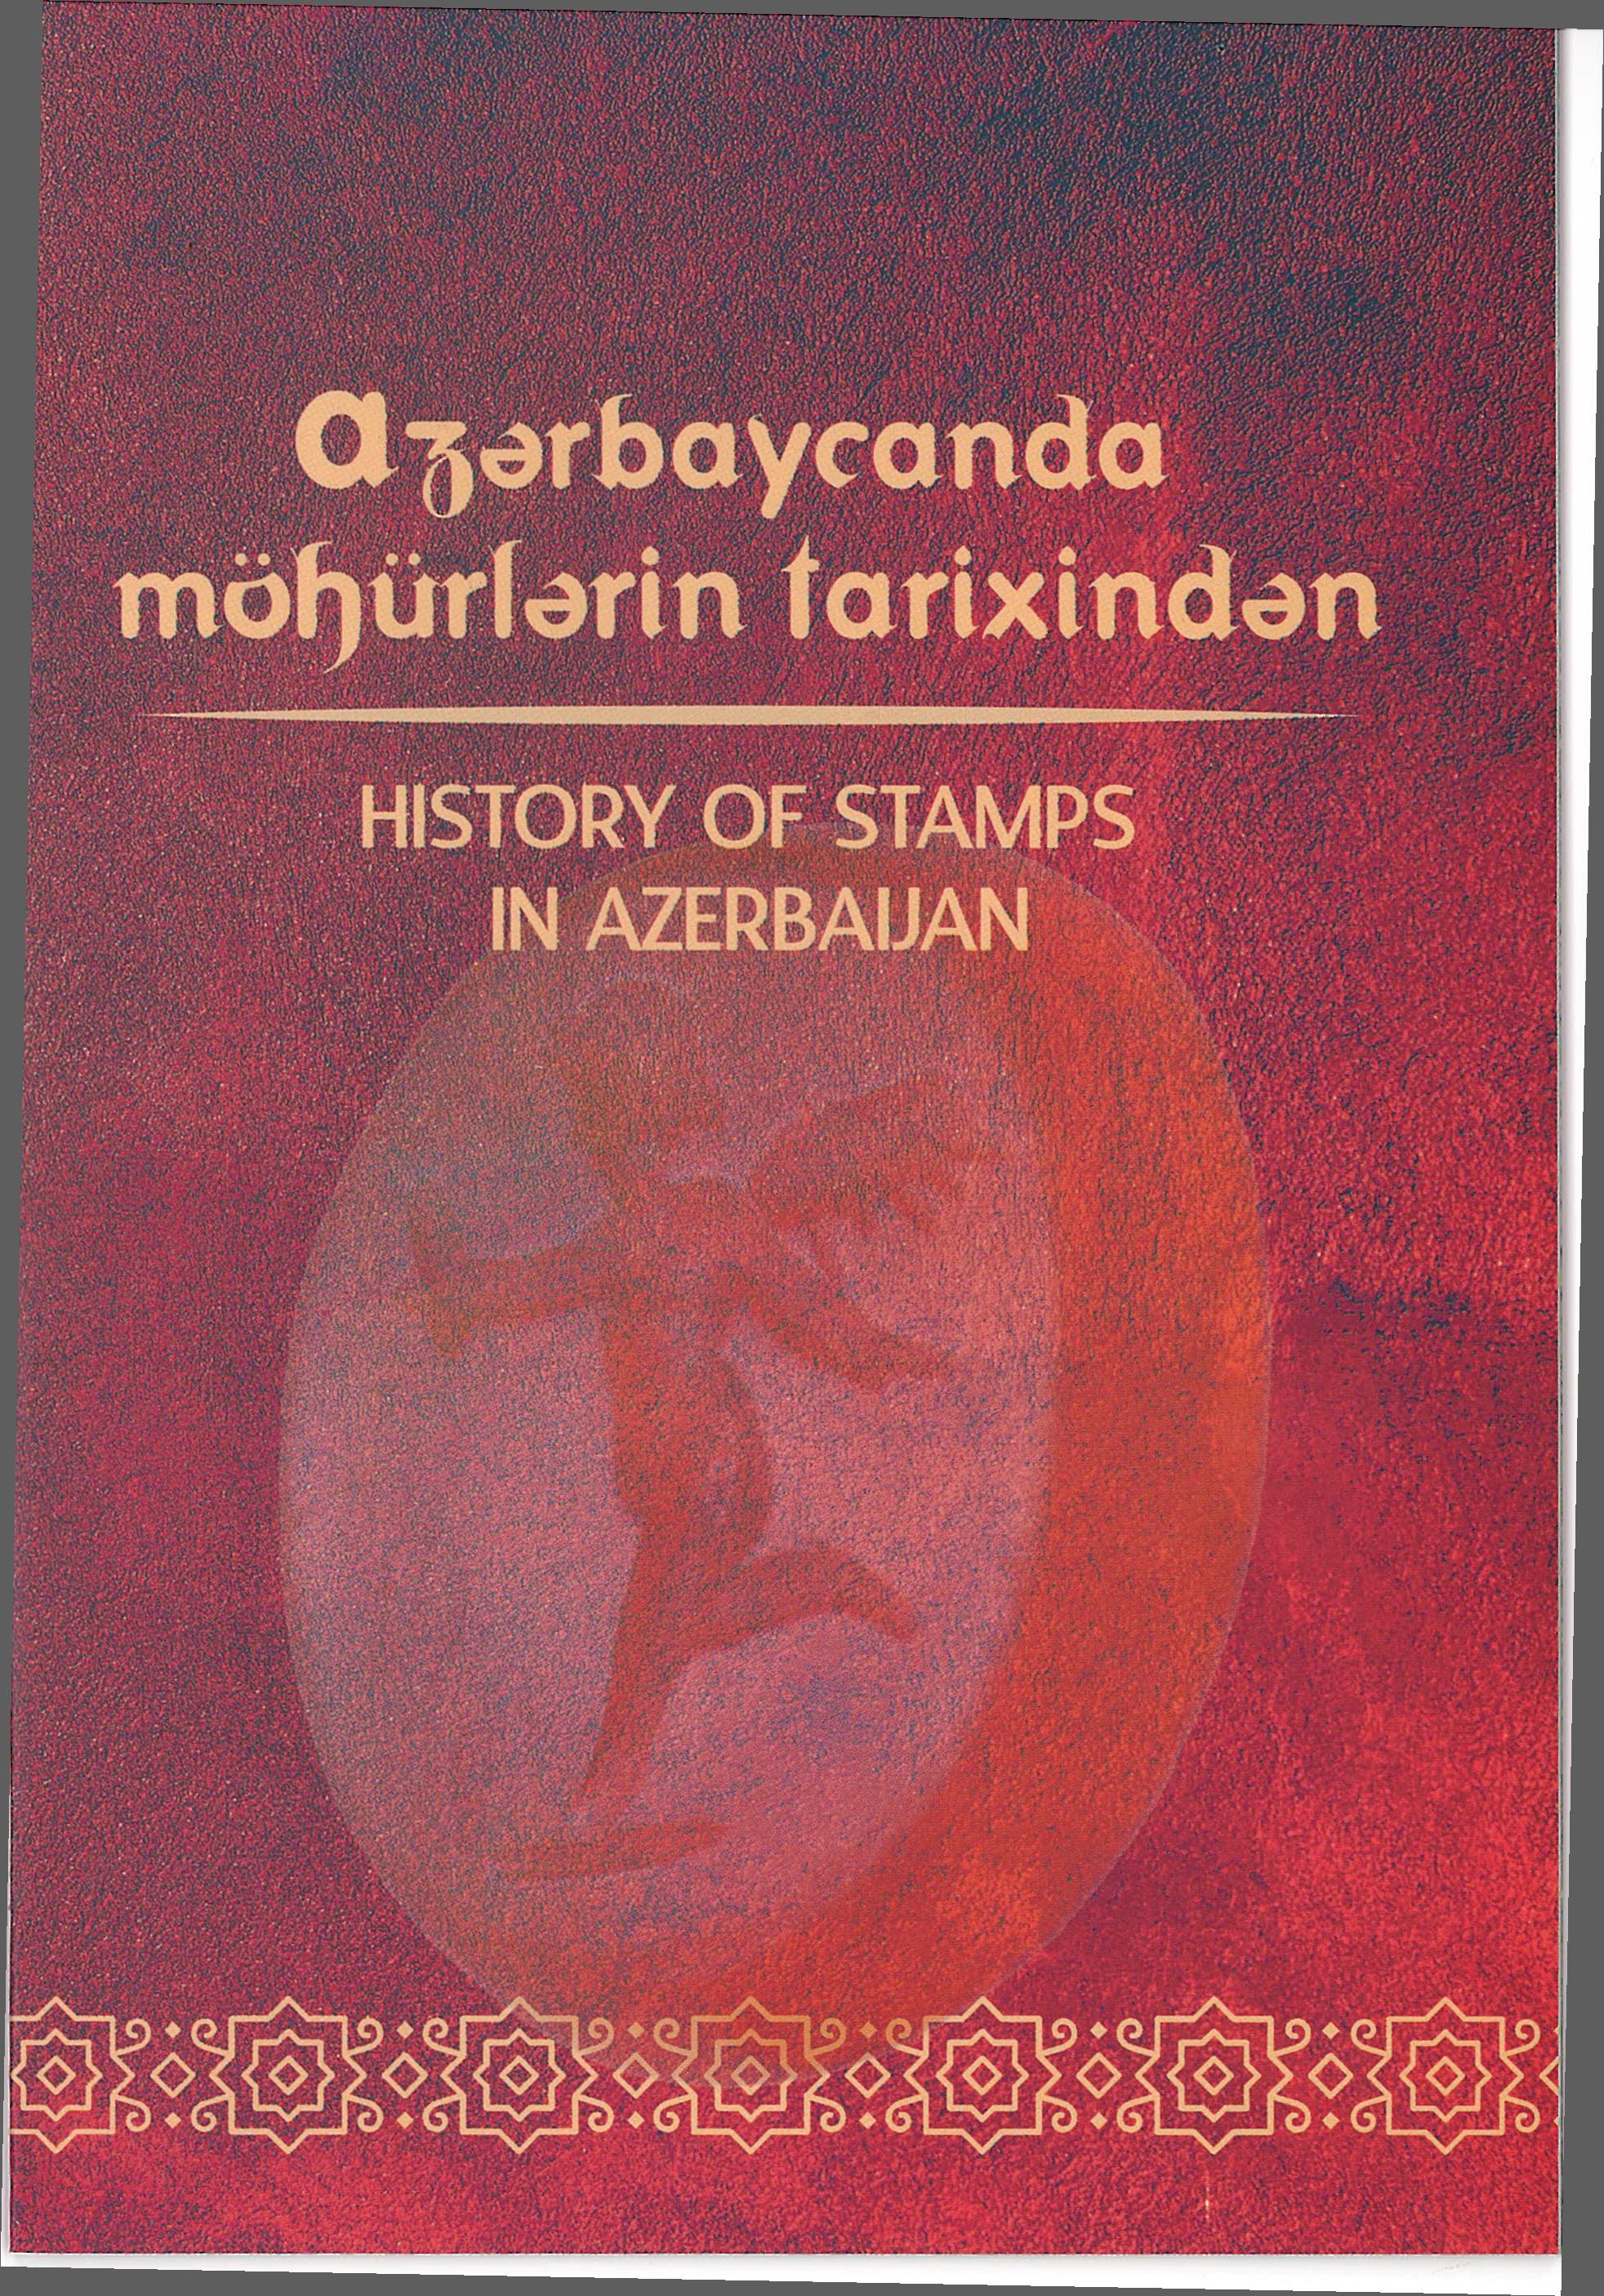  History of Stamps in Azerbaijan